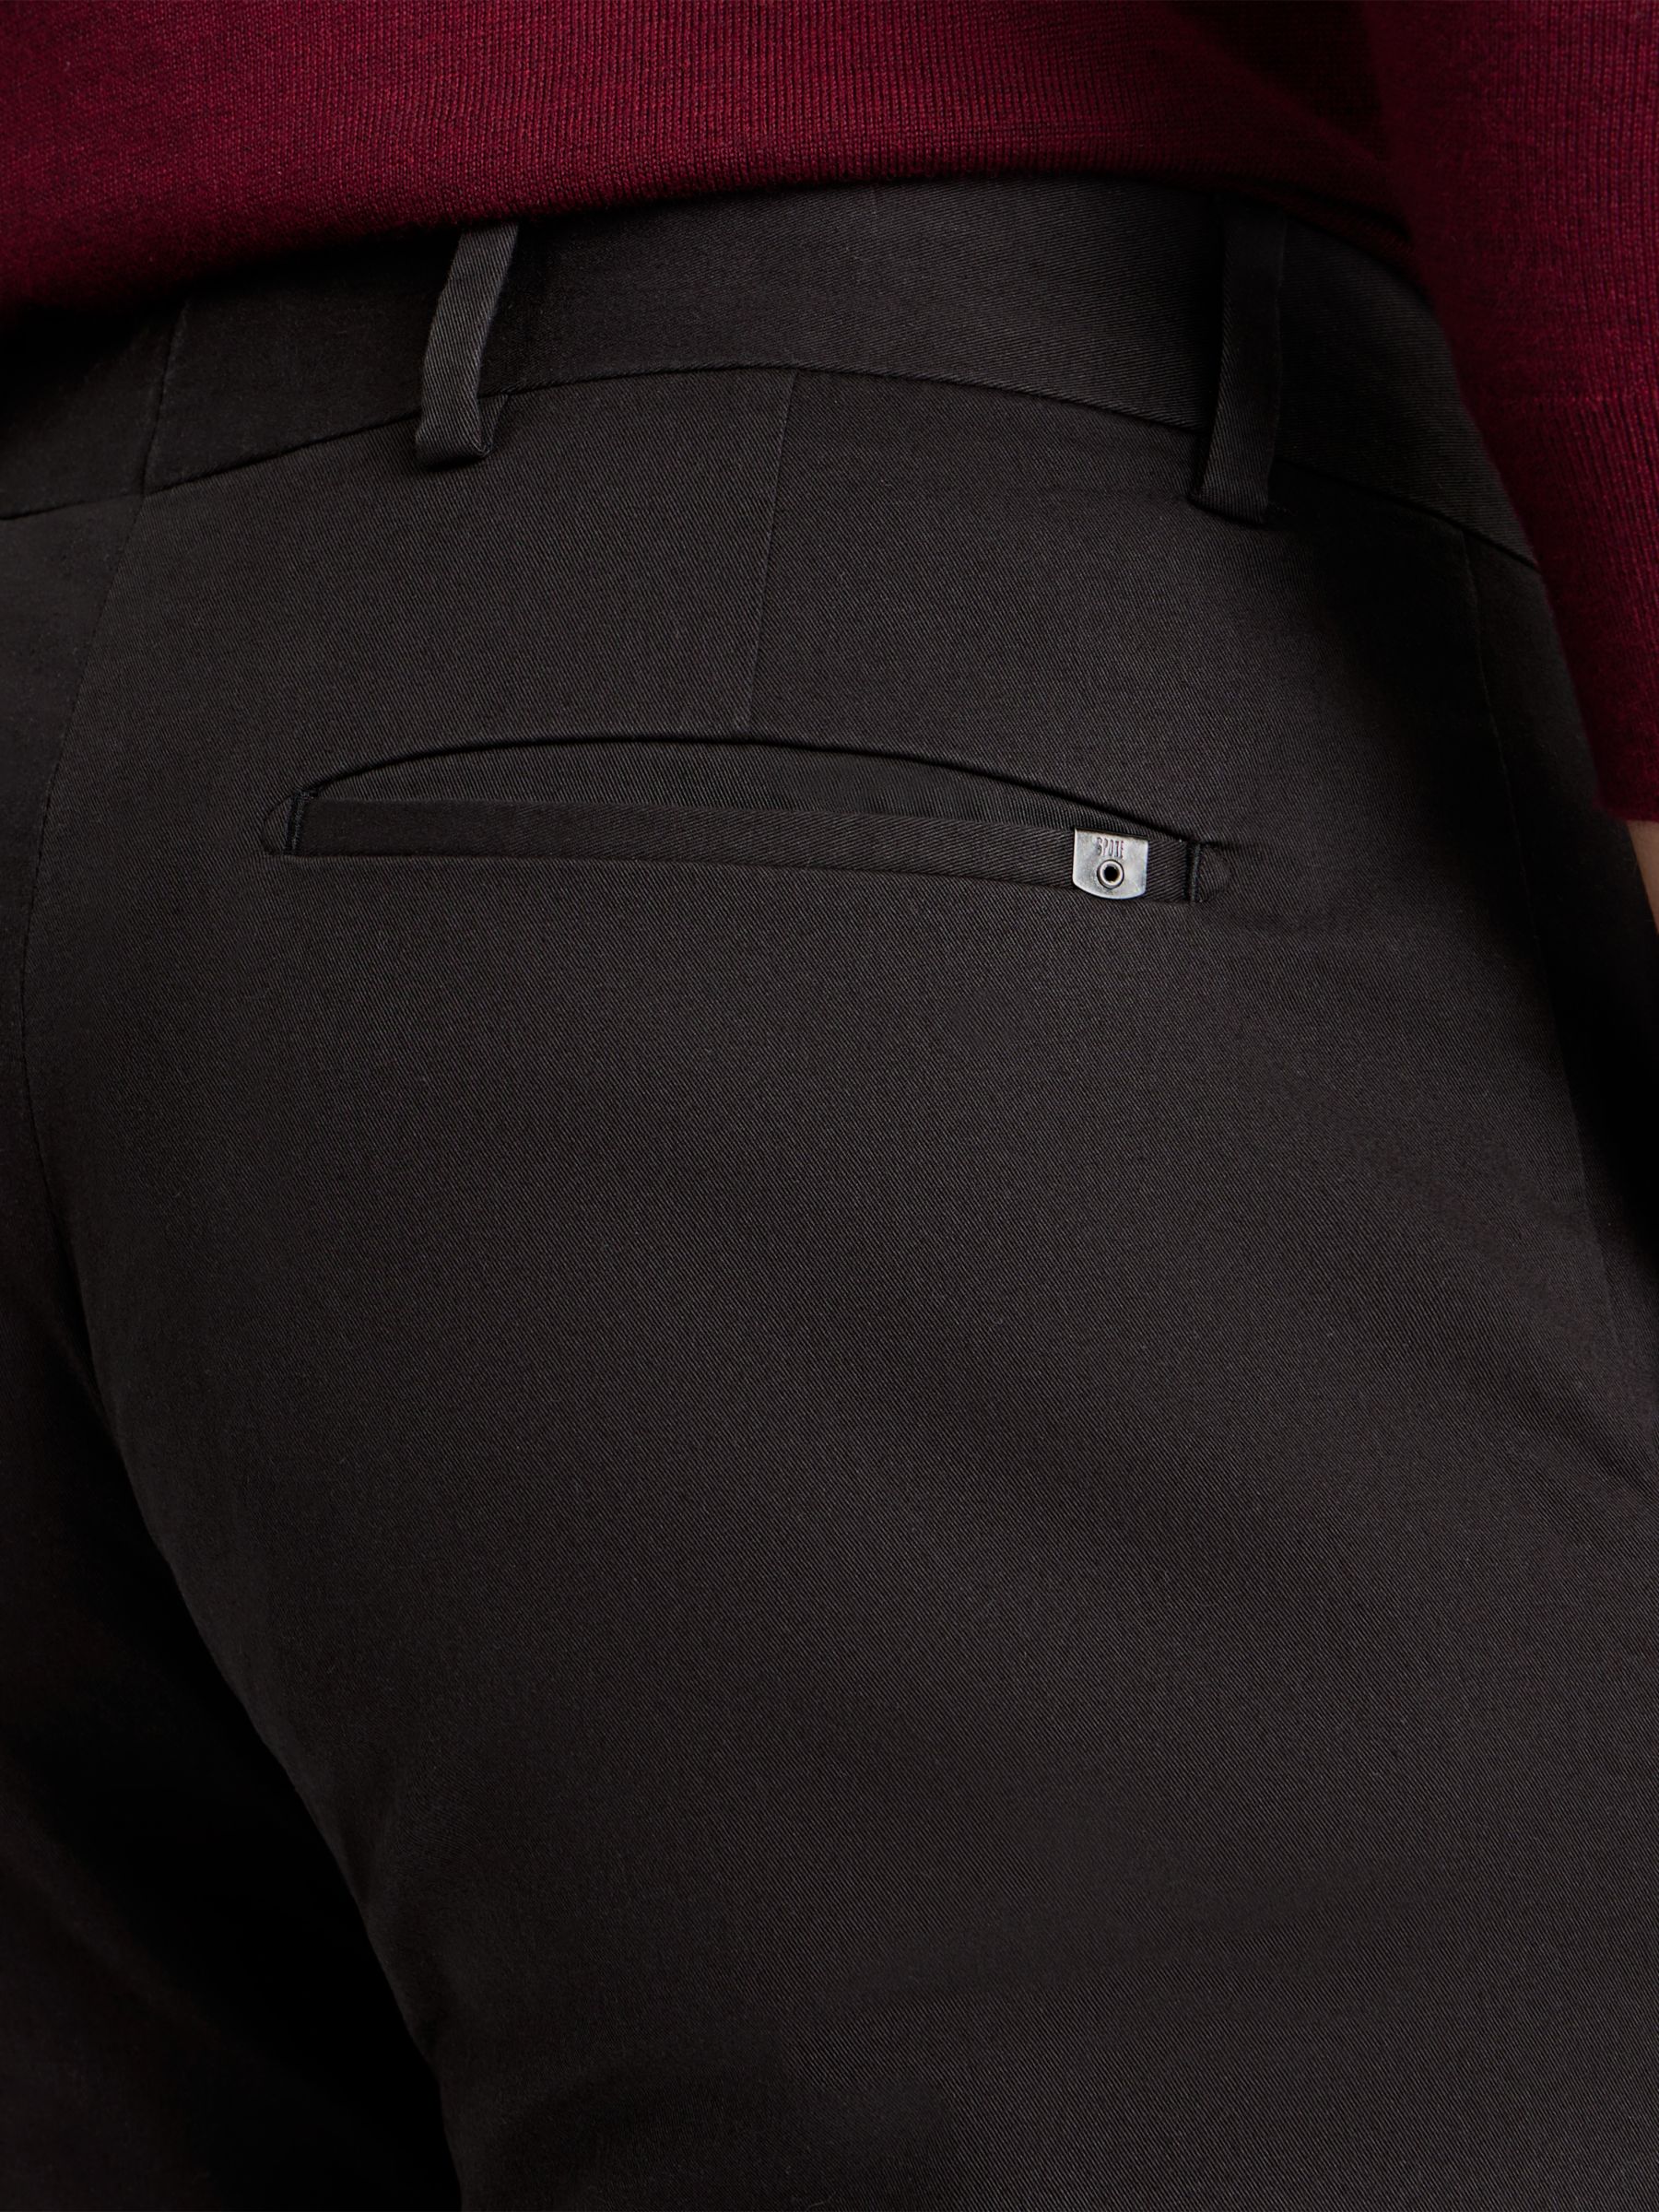 Buy SPOKE Sharps Cotton Blend Broad Thigh Chinos Online at johnlewis.com